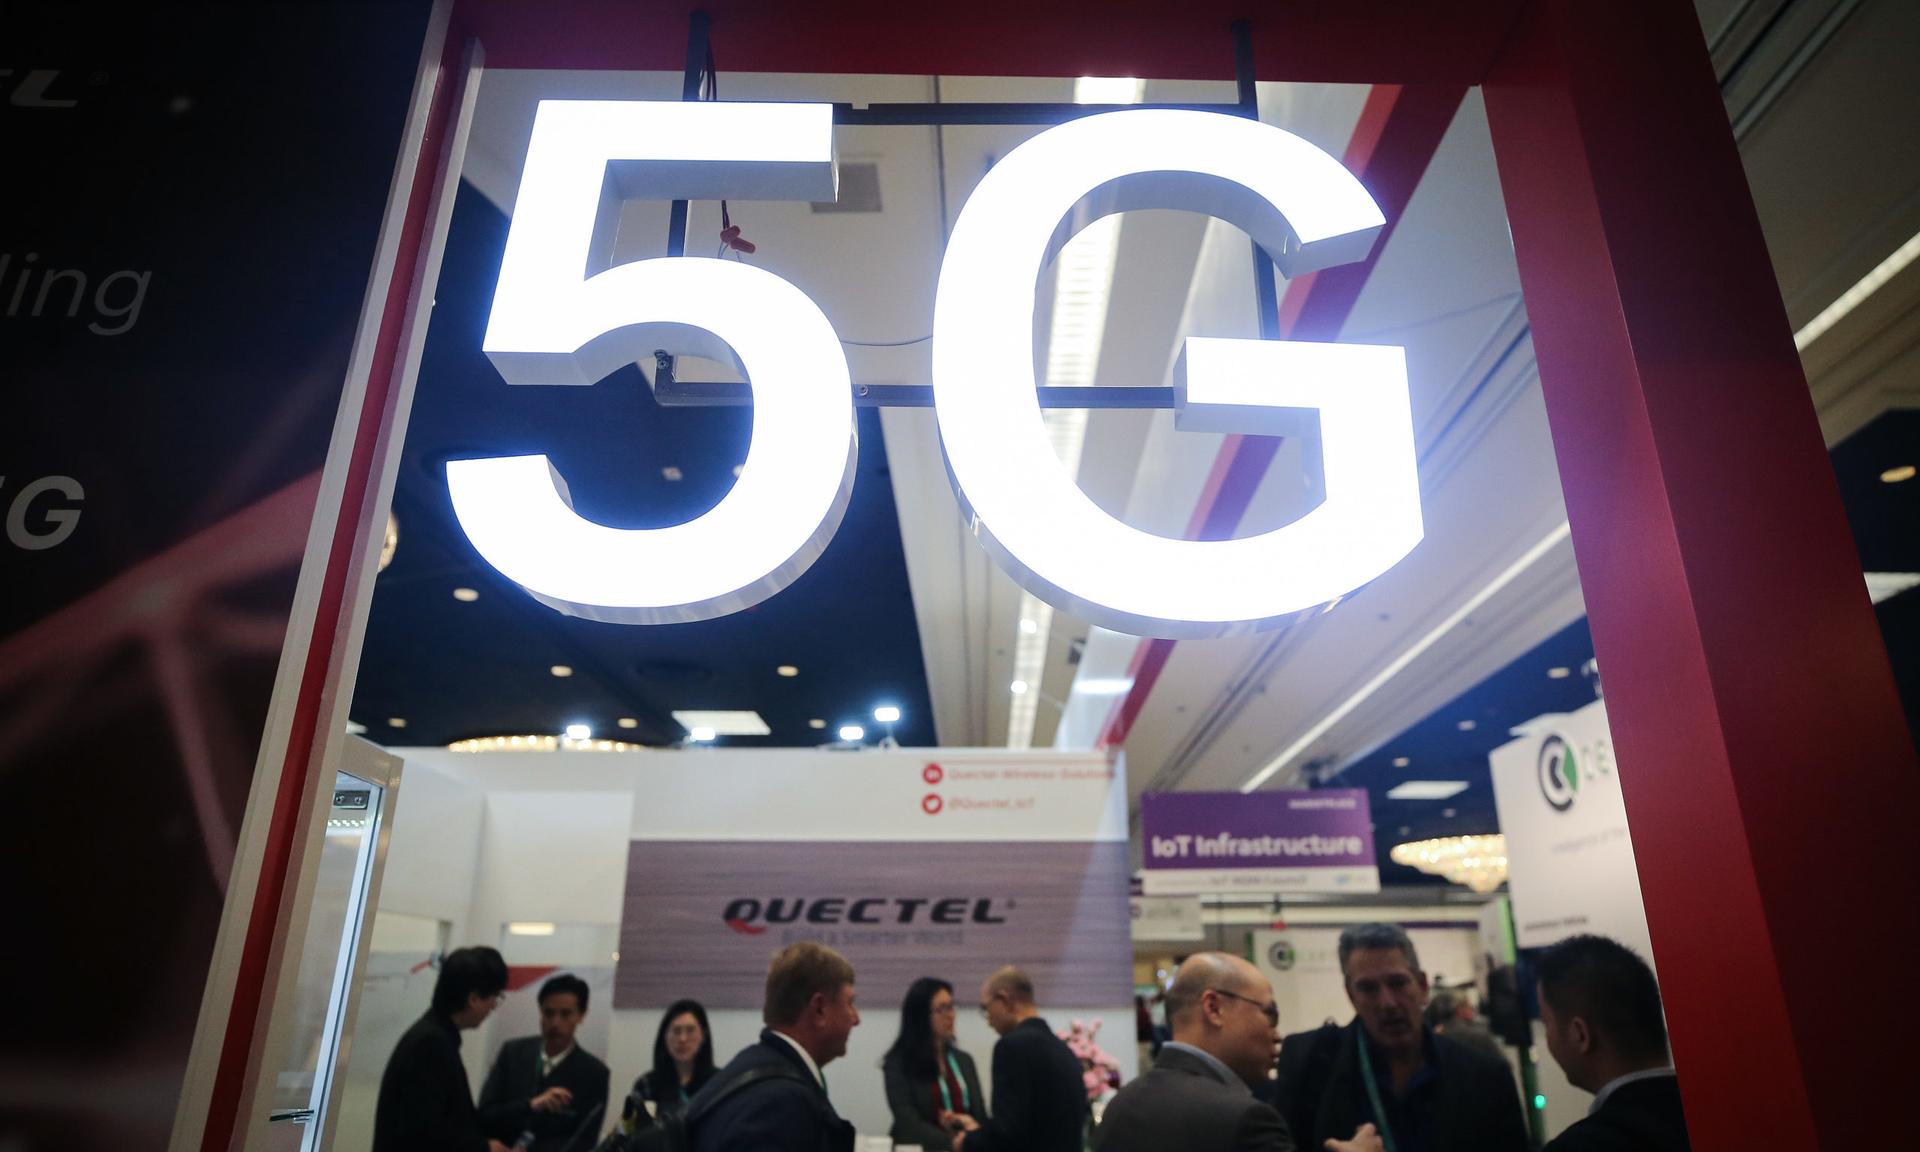 Attendees and workers chat beneath a &#8216;5G&#8217; logo at the Quectel booth at CES 2020 at the Las Vegas Convention Center on January 8, 2020 in Las Vegas, Nevada. CES, the world&#8217;s largest annual consumer technology trade show, runs through January 10 and features about 4,500 exhibitors showing off their latest products and services to mo...